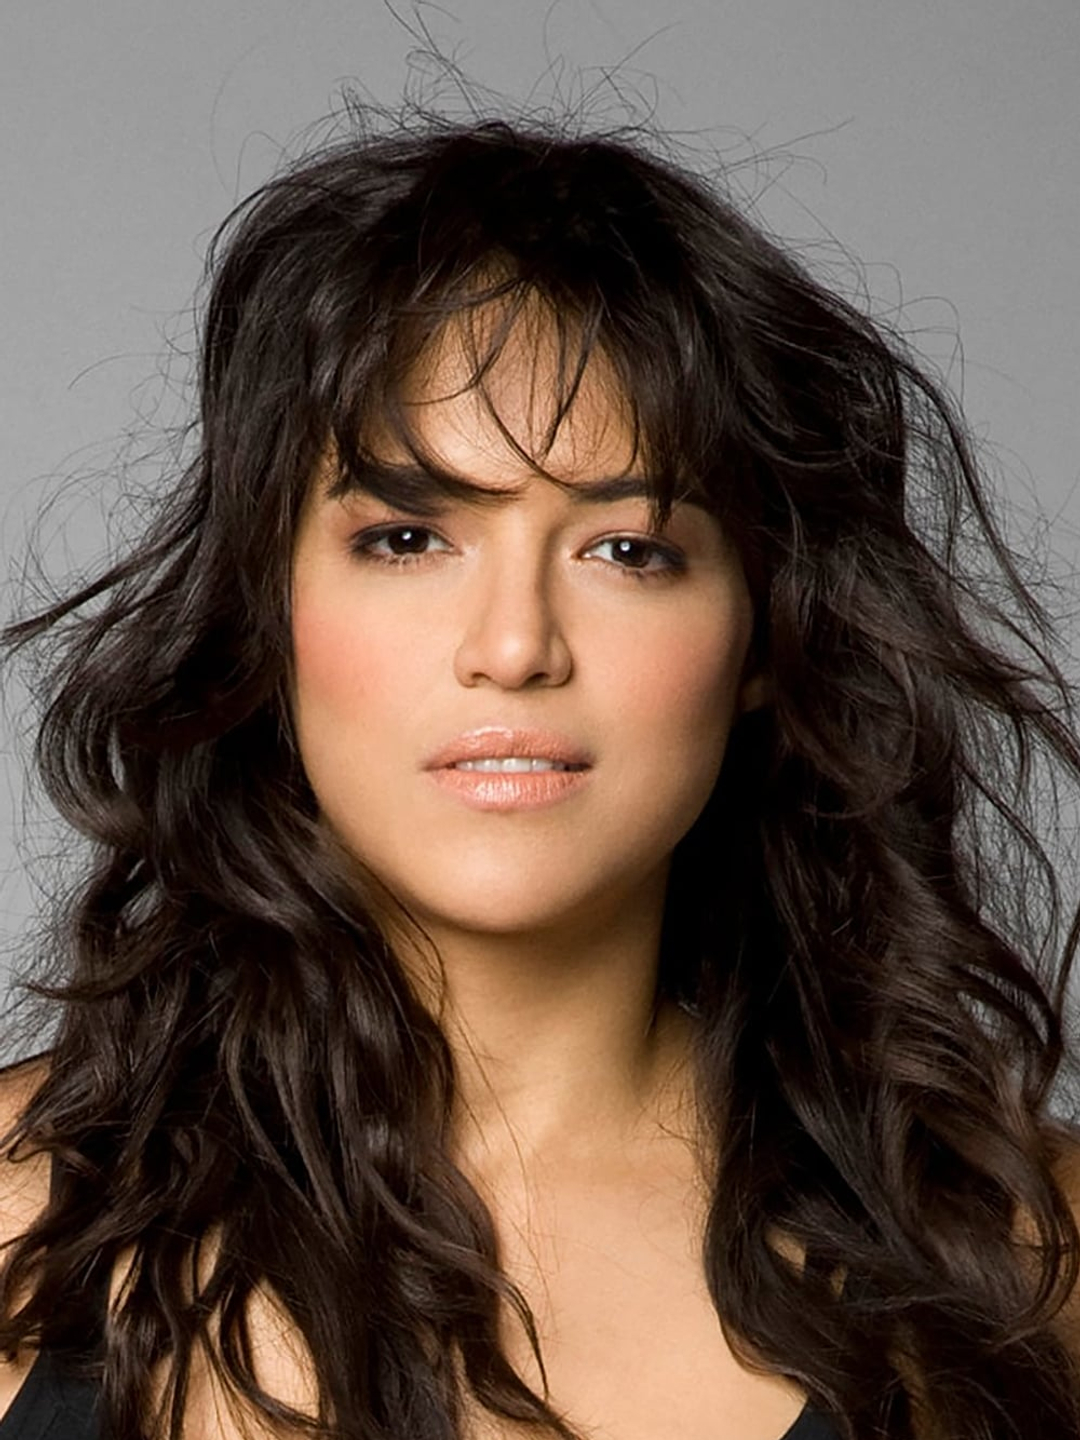 Michelle Rodriguez who is her father